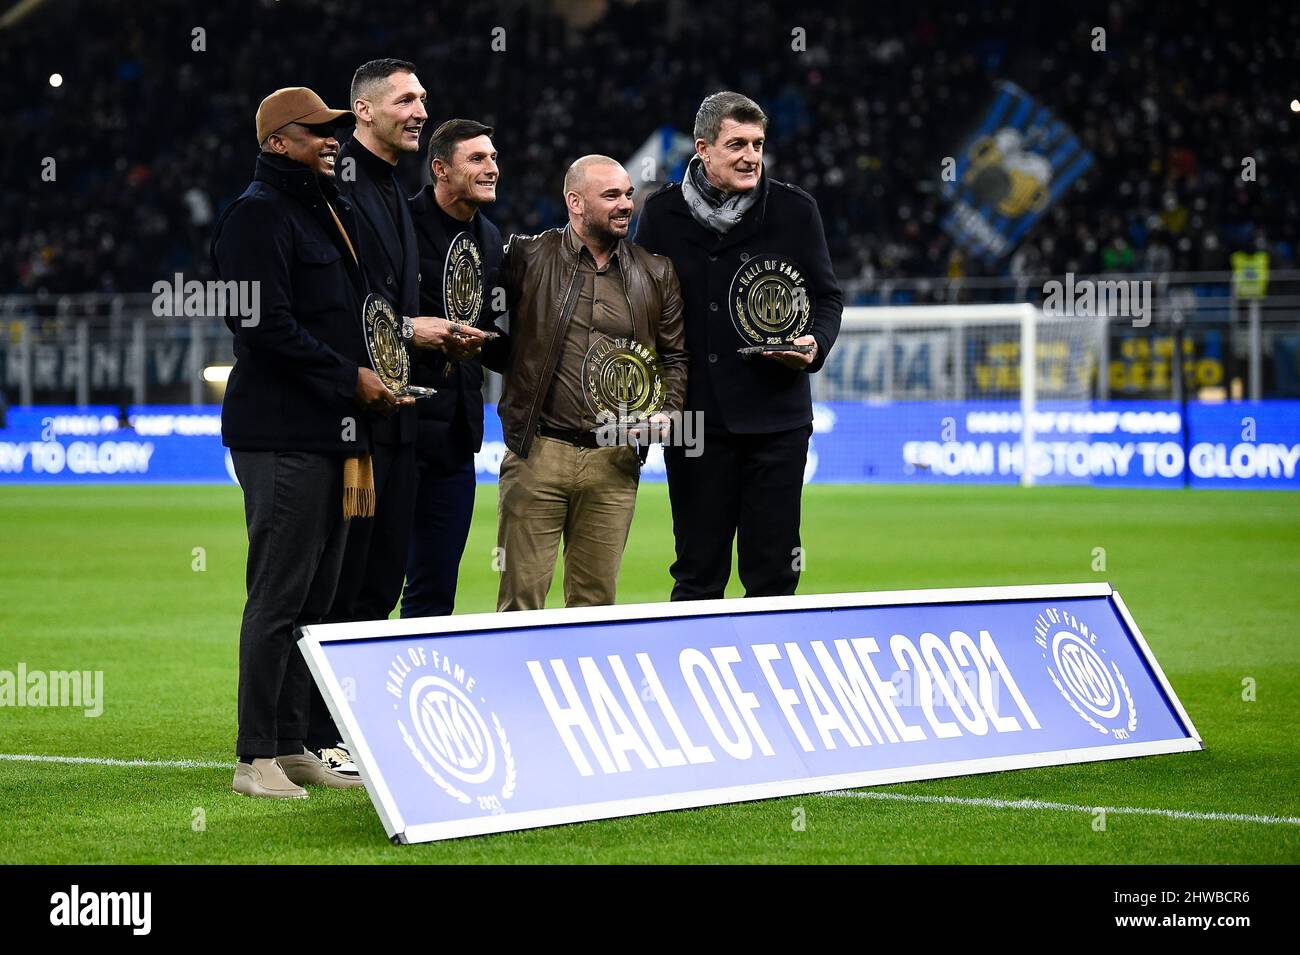 Milan, Italy. 04 March 2022. Samuele Eto'o, Marco Materazzi, Javier Zanetti and Gianluca Pagliuca pose for a photo prior to the Serie A football match between FC Internazionale and US Salernitana. Credit: Nicolò Campo/Alamy Live News Stock Photo